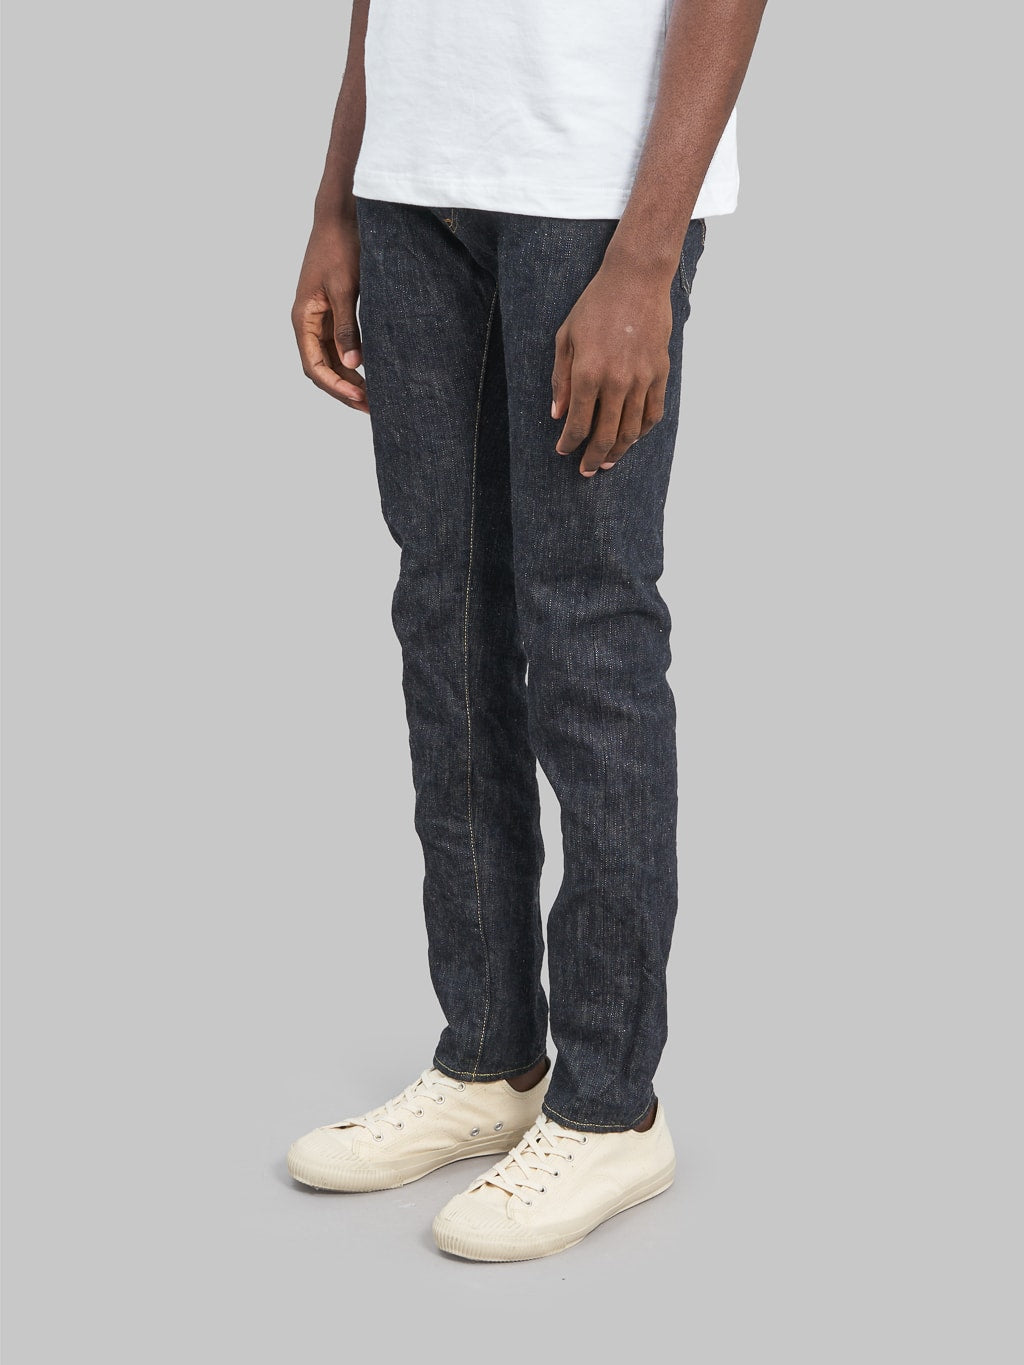 Oni denim kihannen relaxed tapered jeans side fit